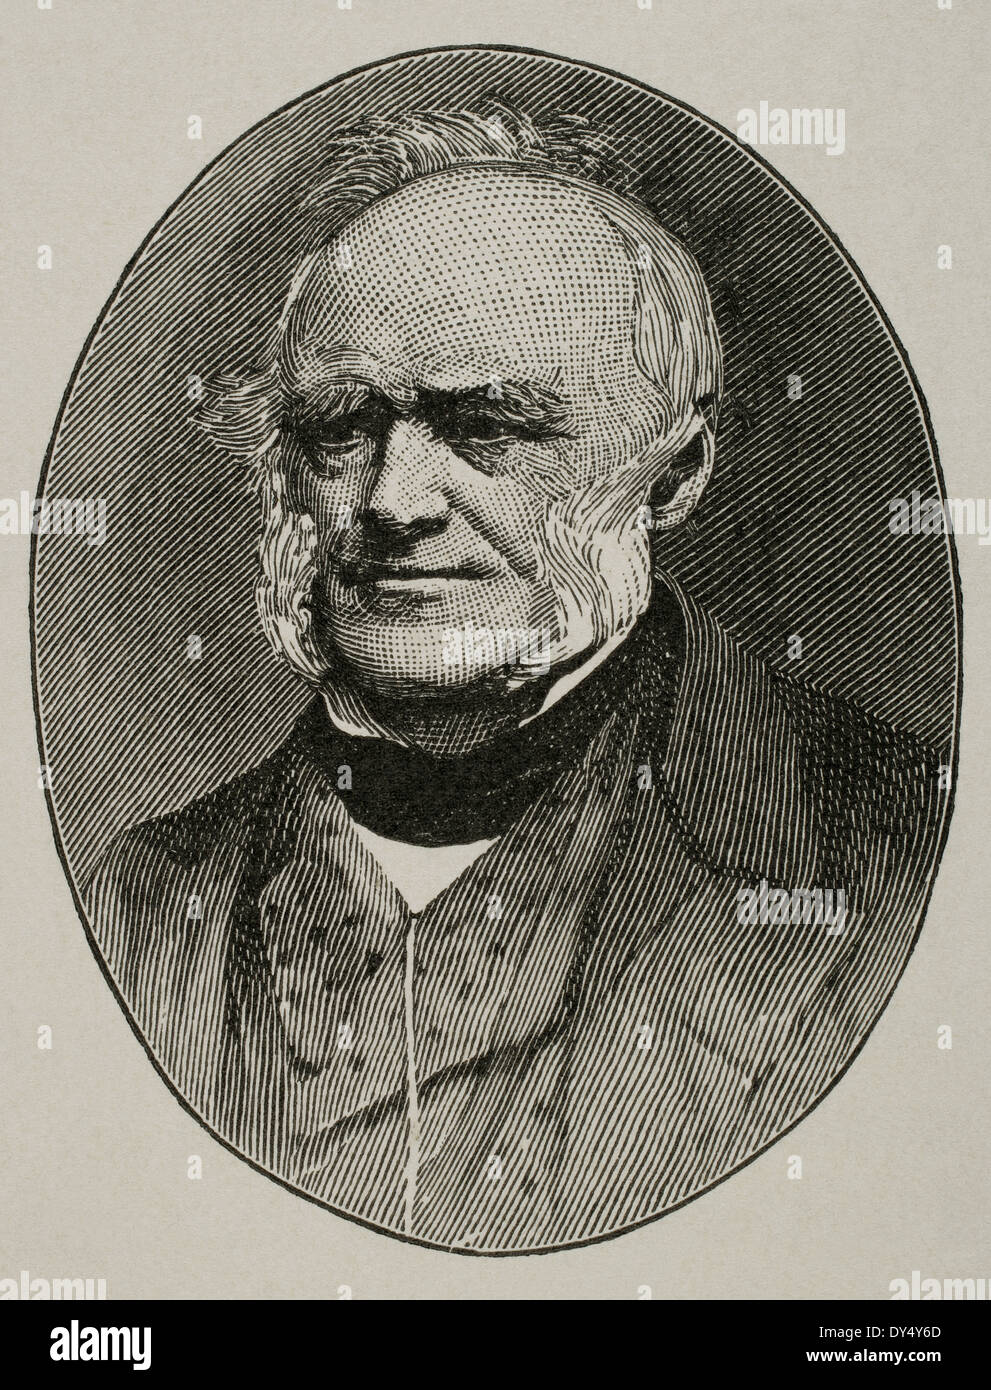 Charles Lyell (1797-1875). British lawyer and geologist. Engraving. Universal History, 19th century. Stock Photo